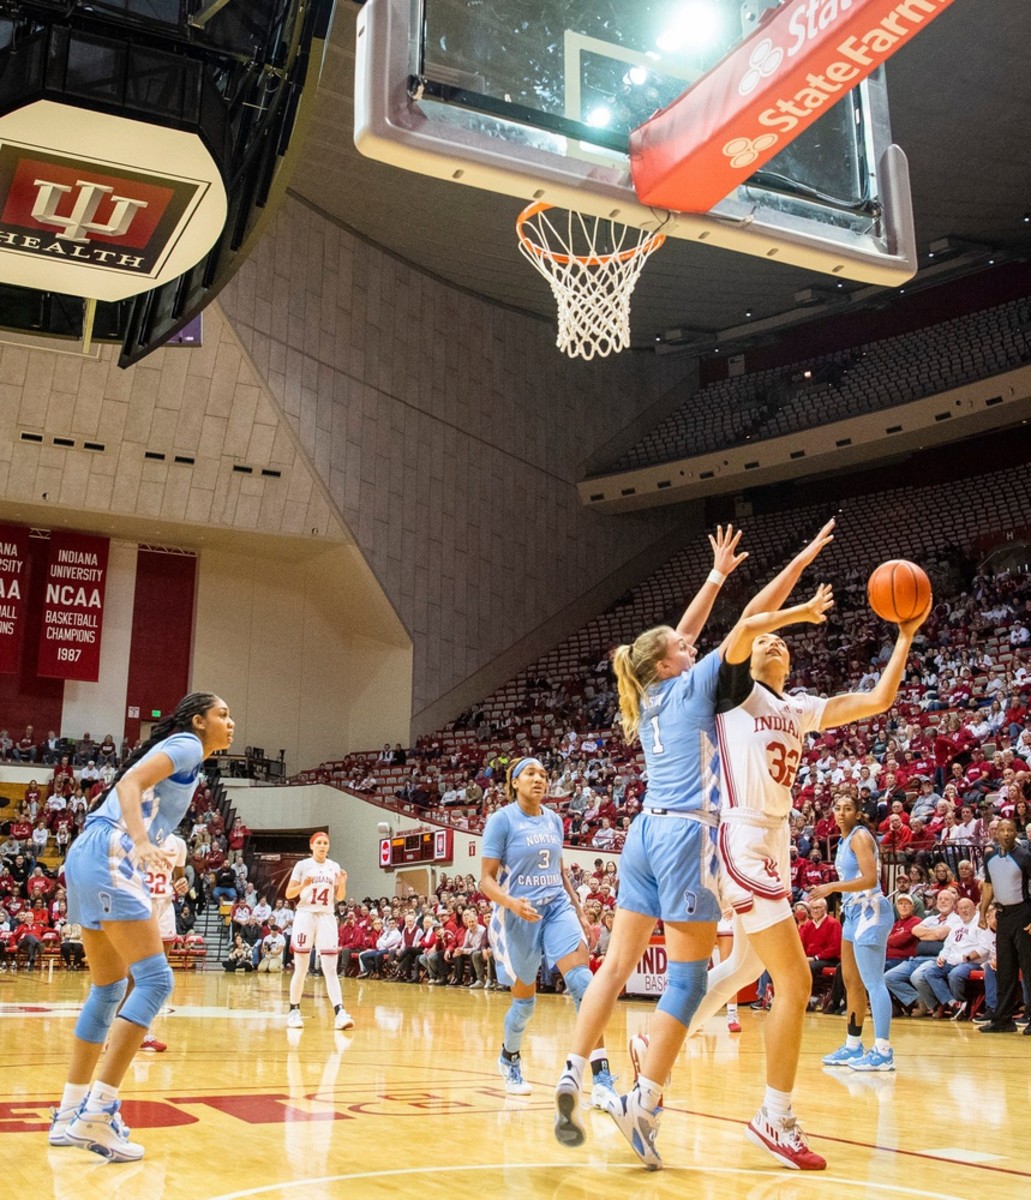 Indiana's Alyssa Geary (32) shoots during the first half of the Indiana versus North Carolina women's basketball game at Simon Skjodt Assembly Hall on Thursday, Dec. 1, 2022.